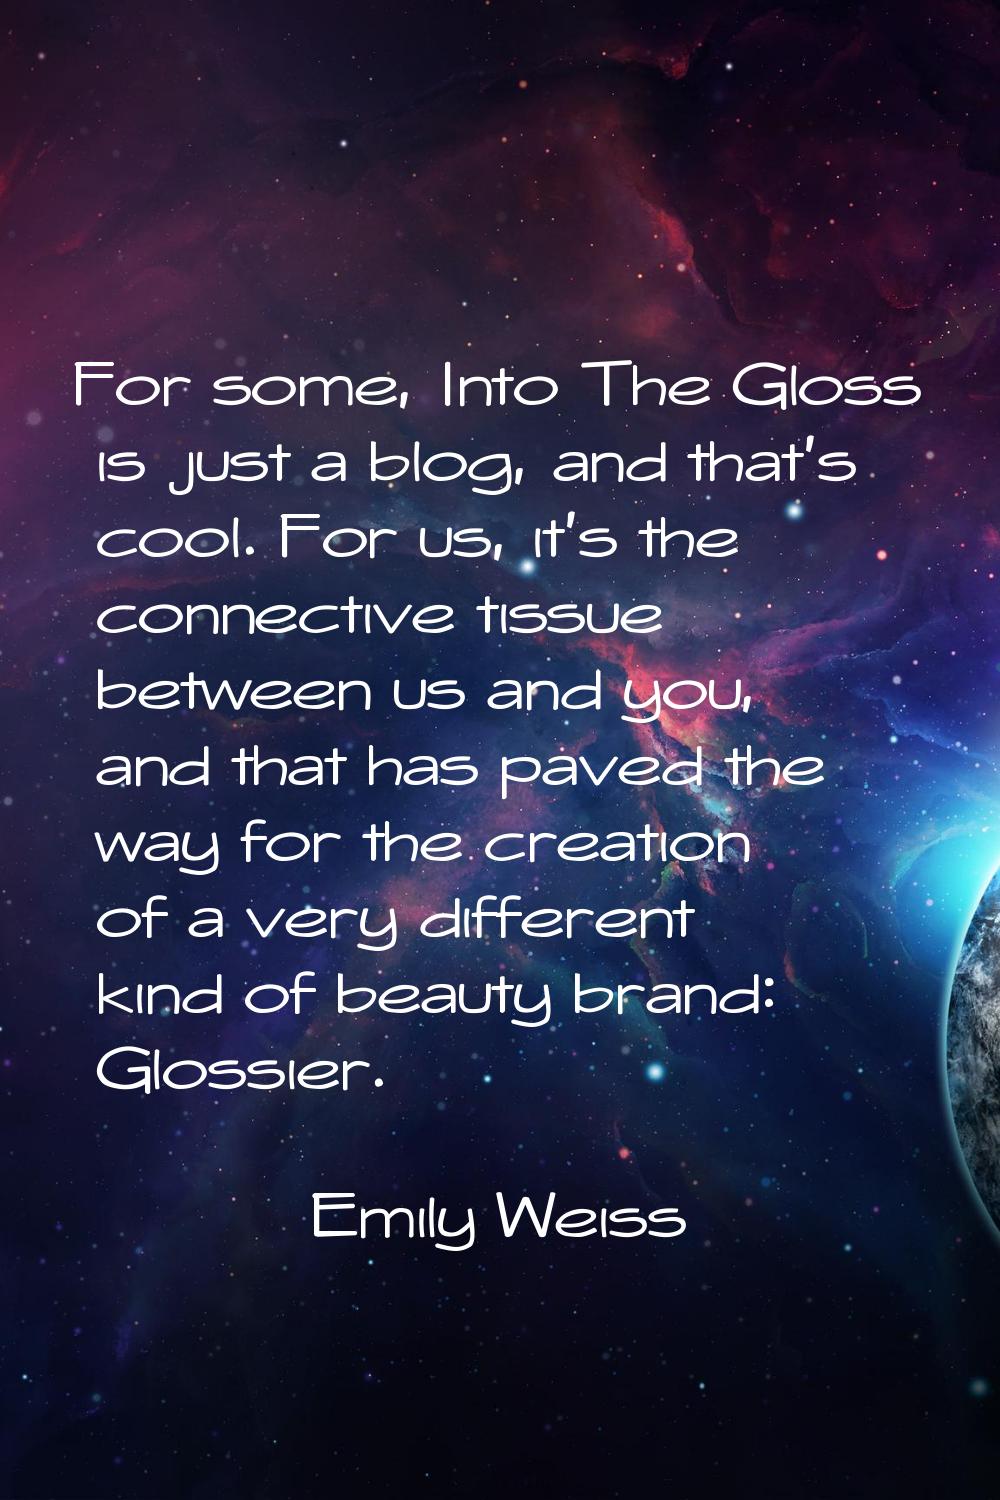 For some, Into The Gloss is just a blog, and that's cool. For us, it's the connective tissue betwee